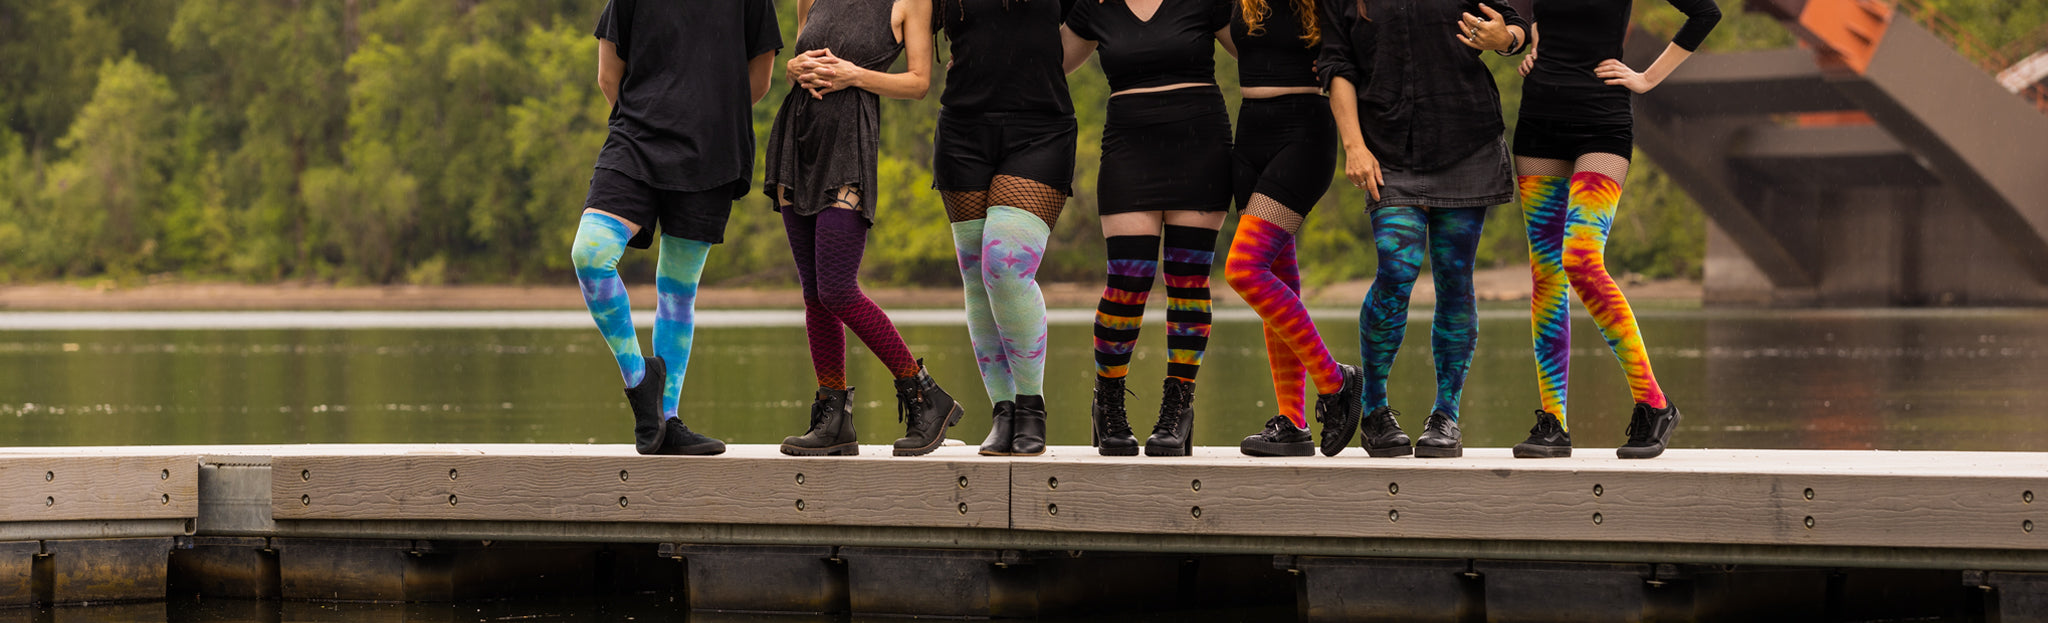 Seven people, each wearing a different pair of tie-dyed thigh high socks. They stand along a dock with a placid river and greenery in the background.